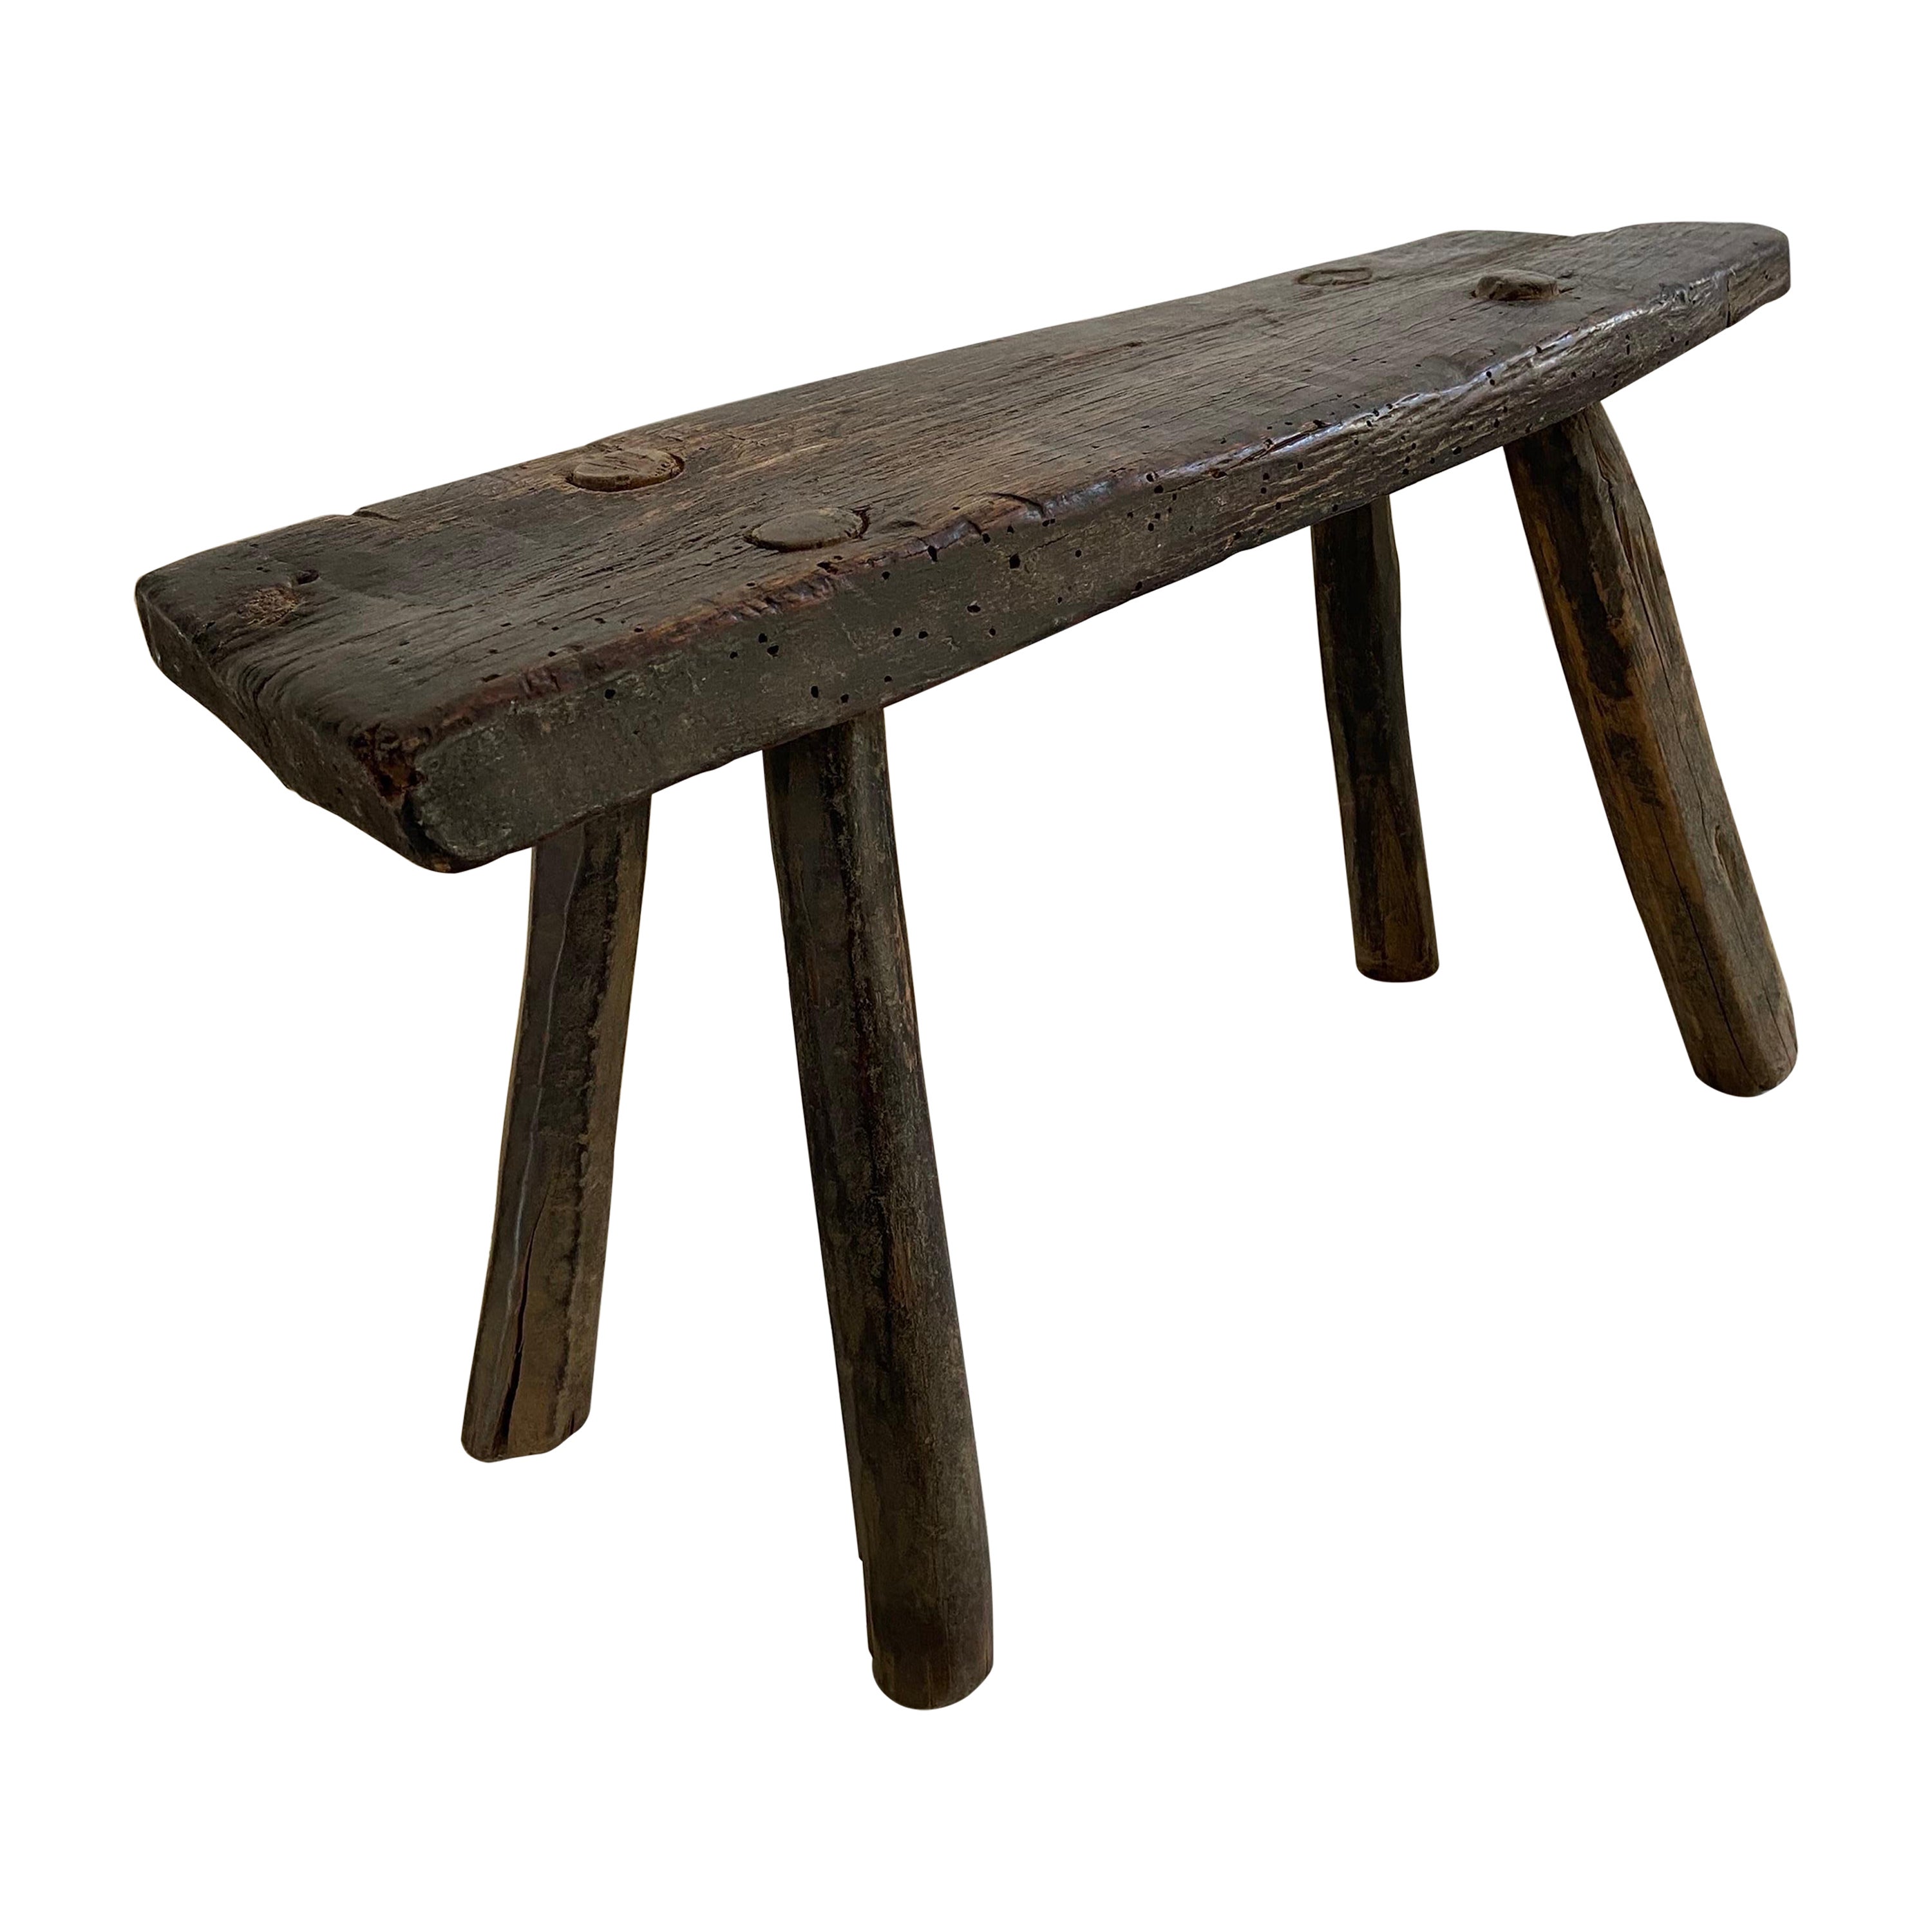 Early 20th Century Hardwood Stool From Mexico